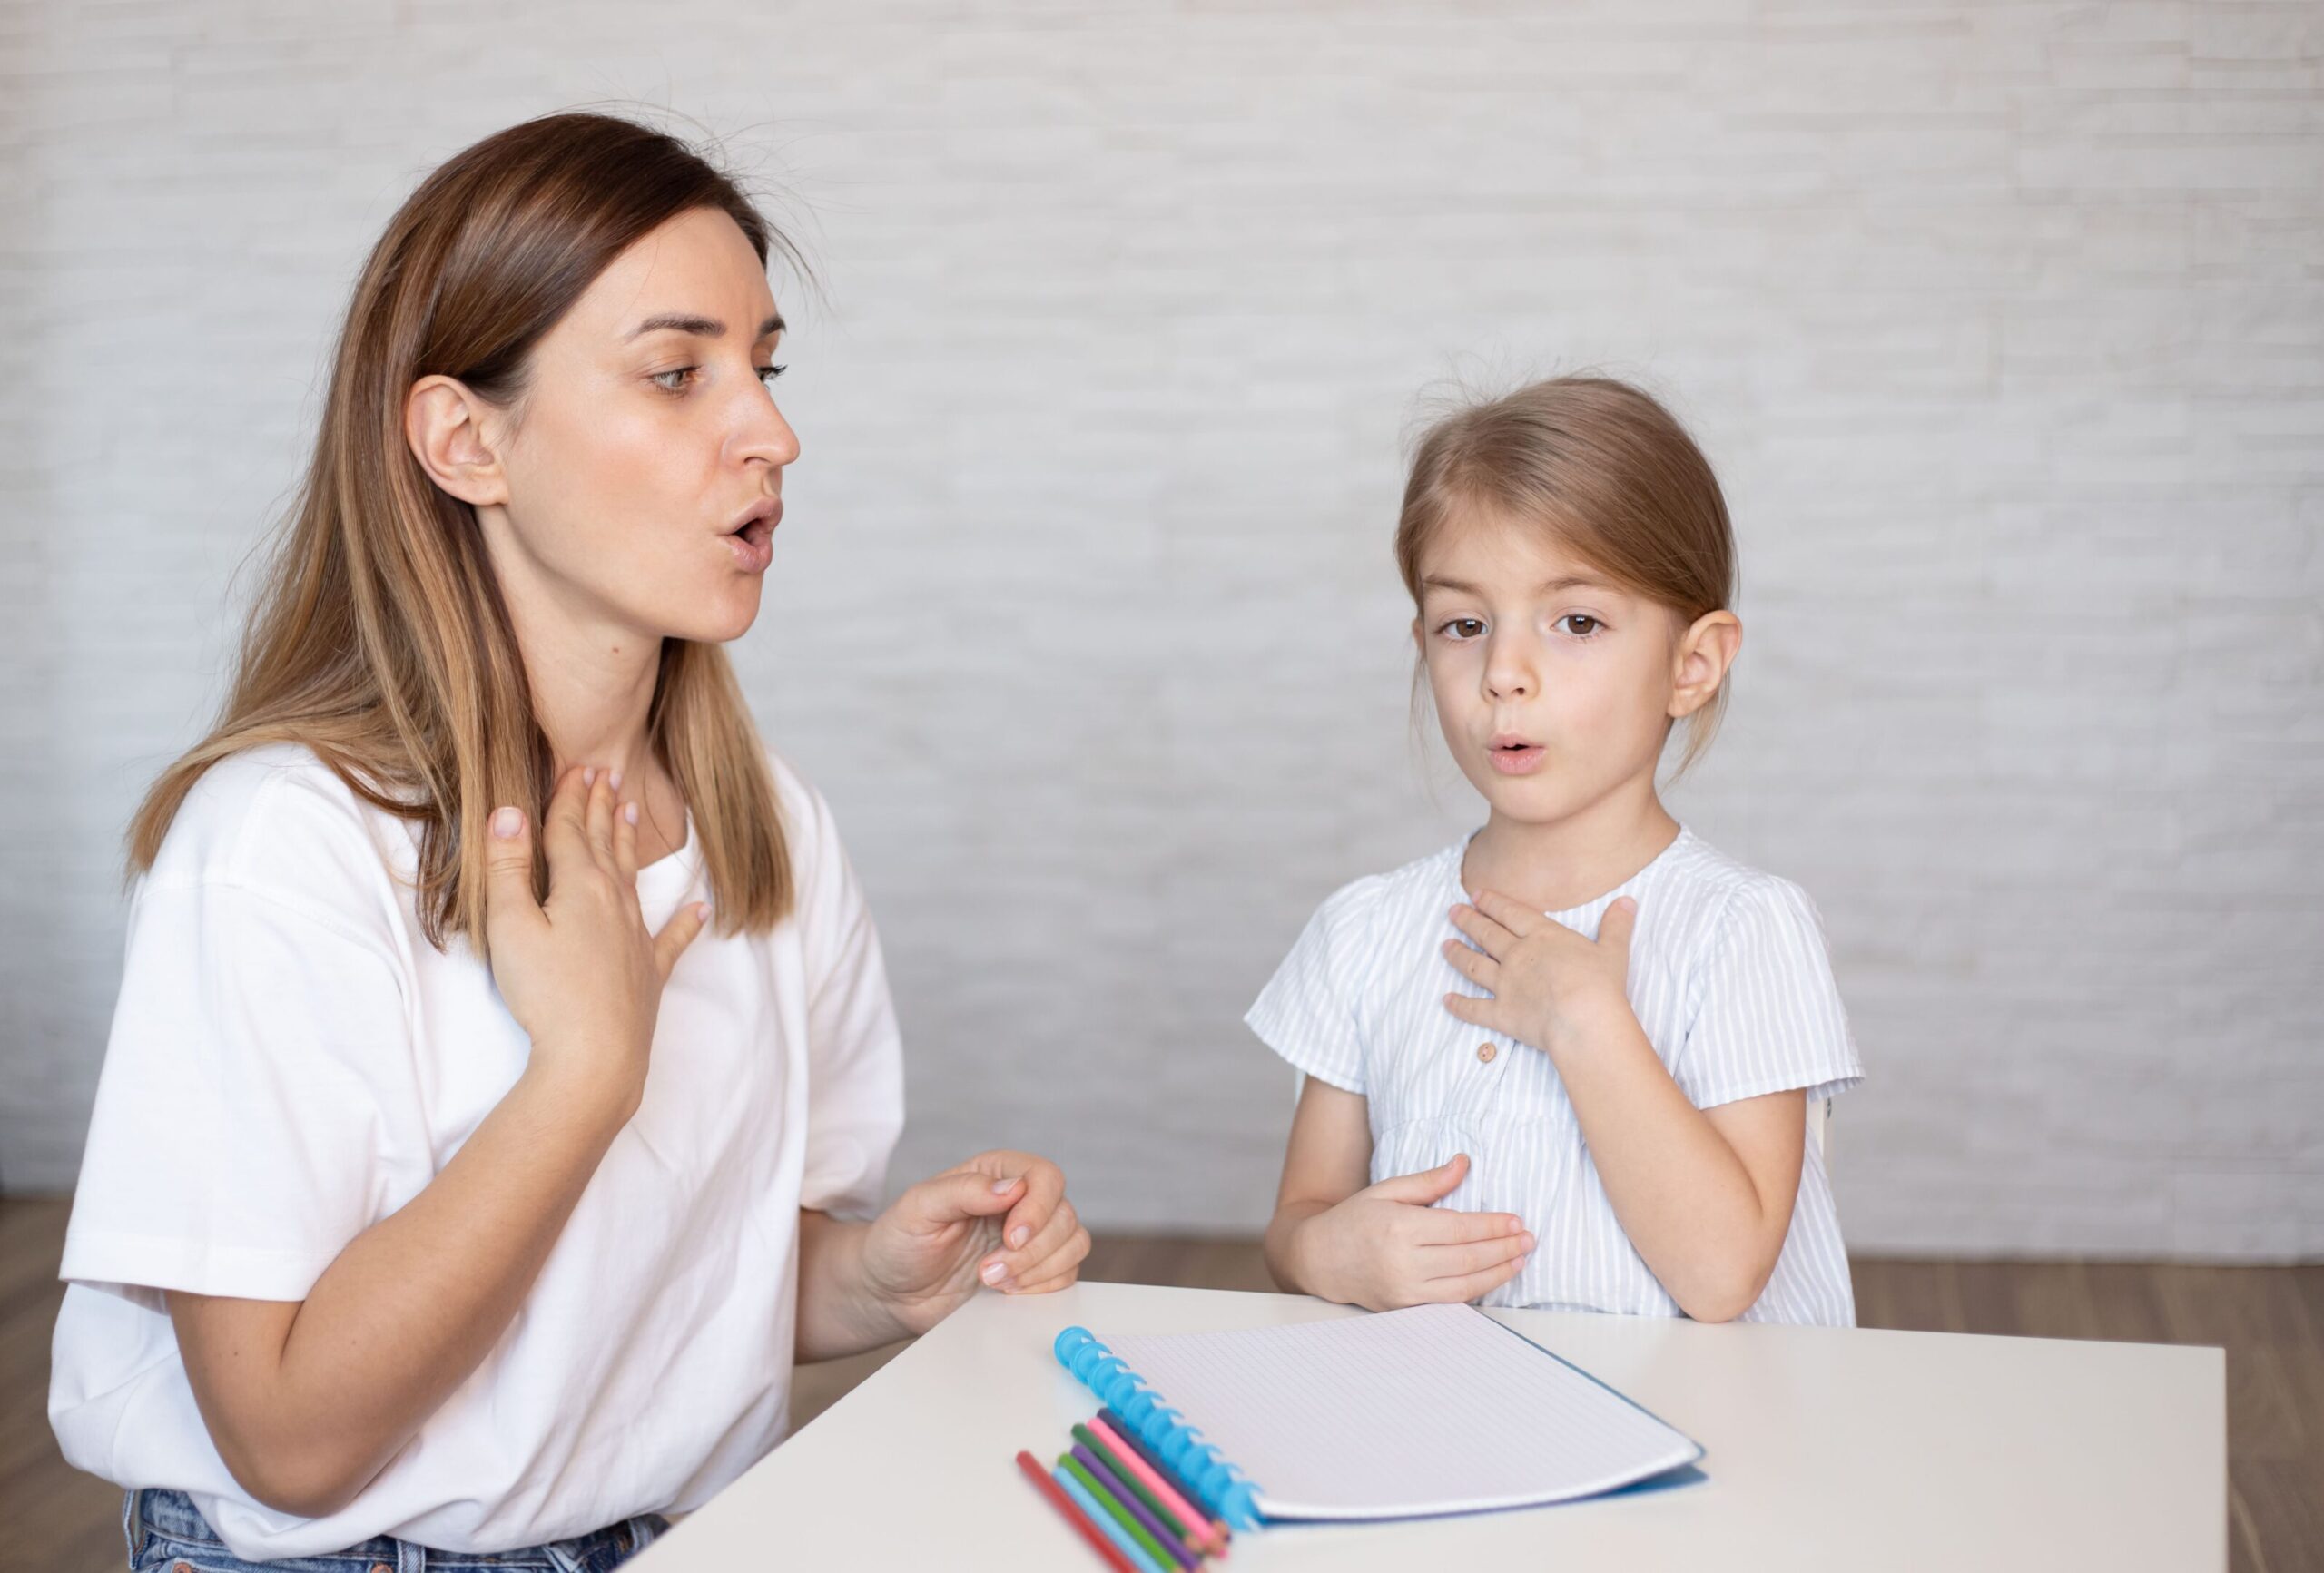 Speech Delay vs. Autism: What’s the Difference?